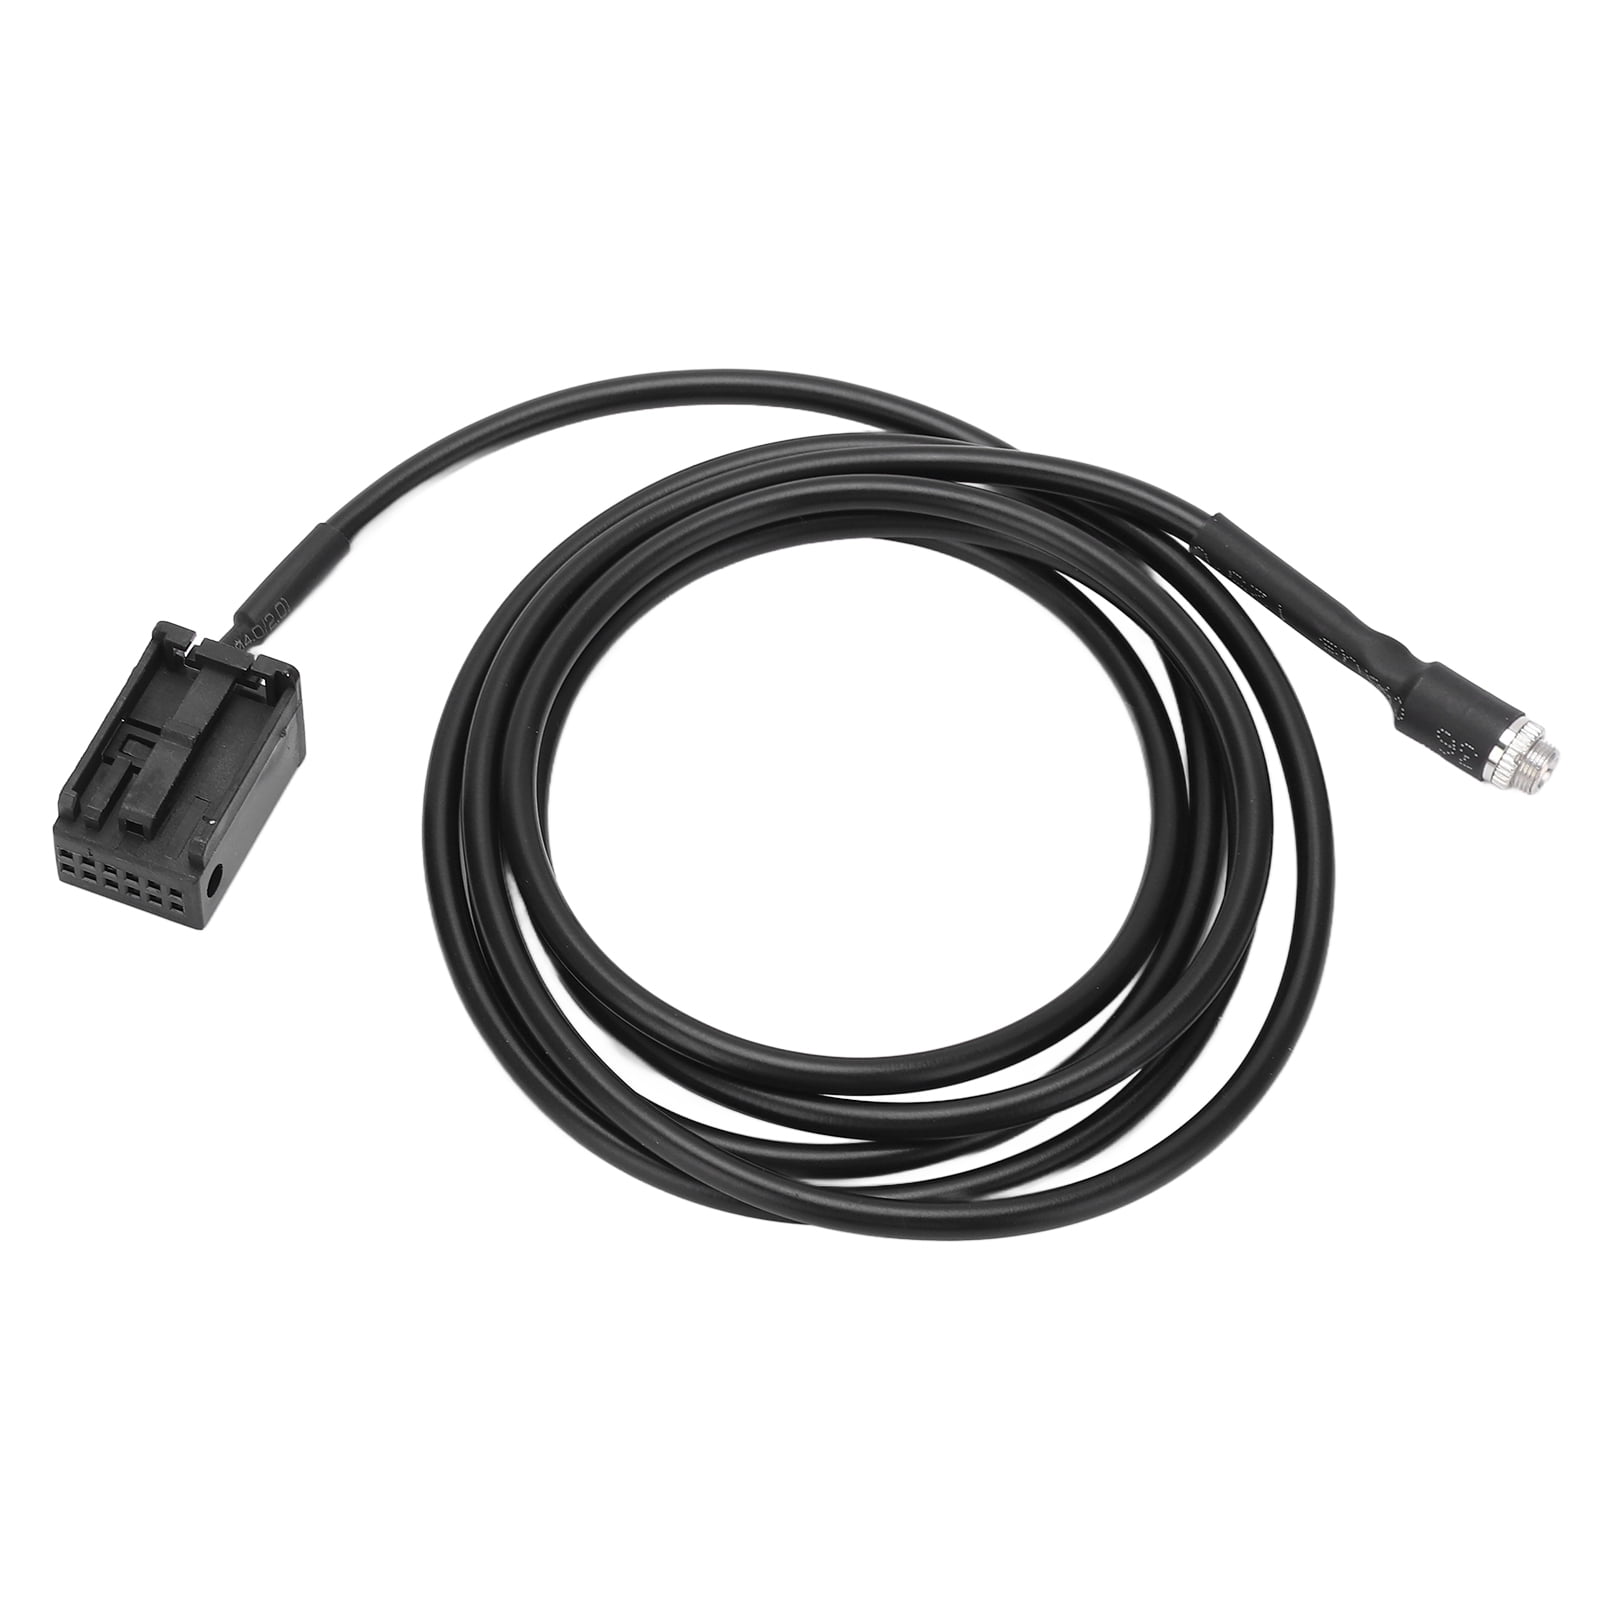 Power Cable for echo Series Fishfinder  010-11678-10 Garmin 6ft 4-pin 